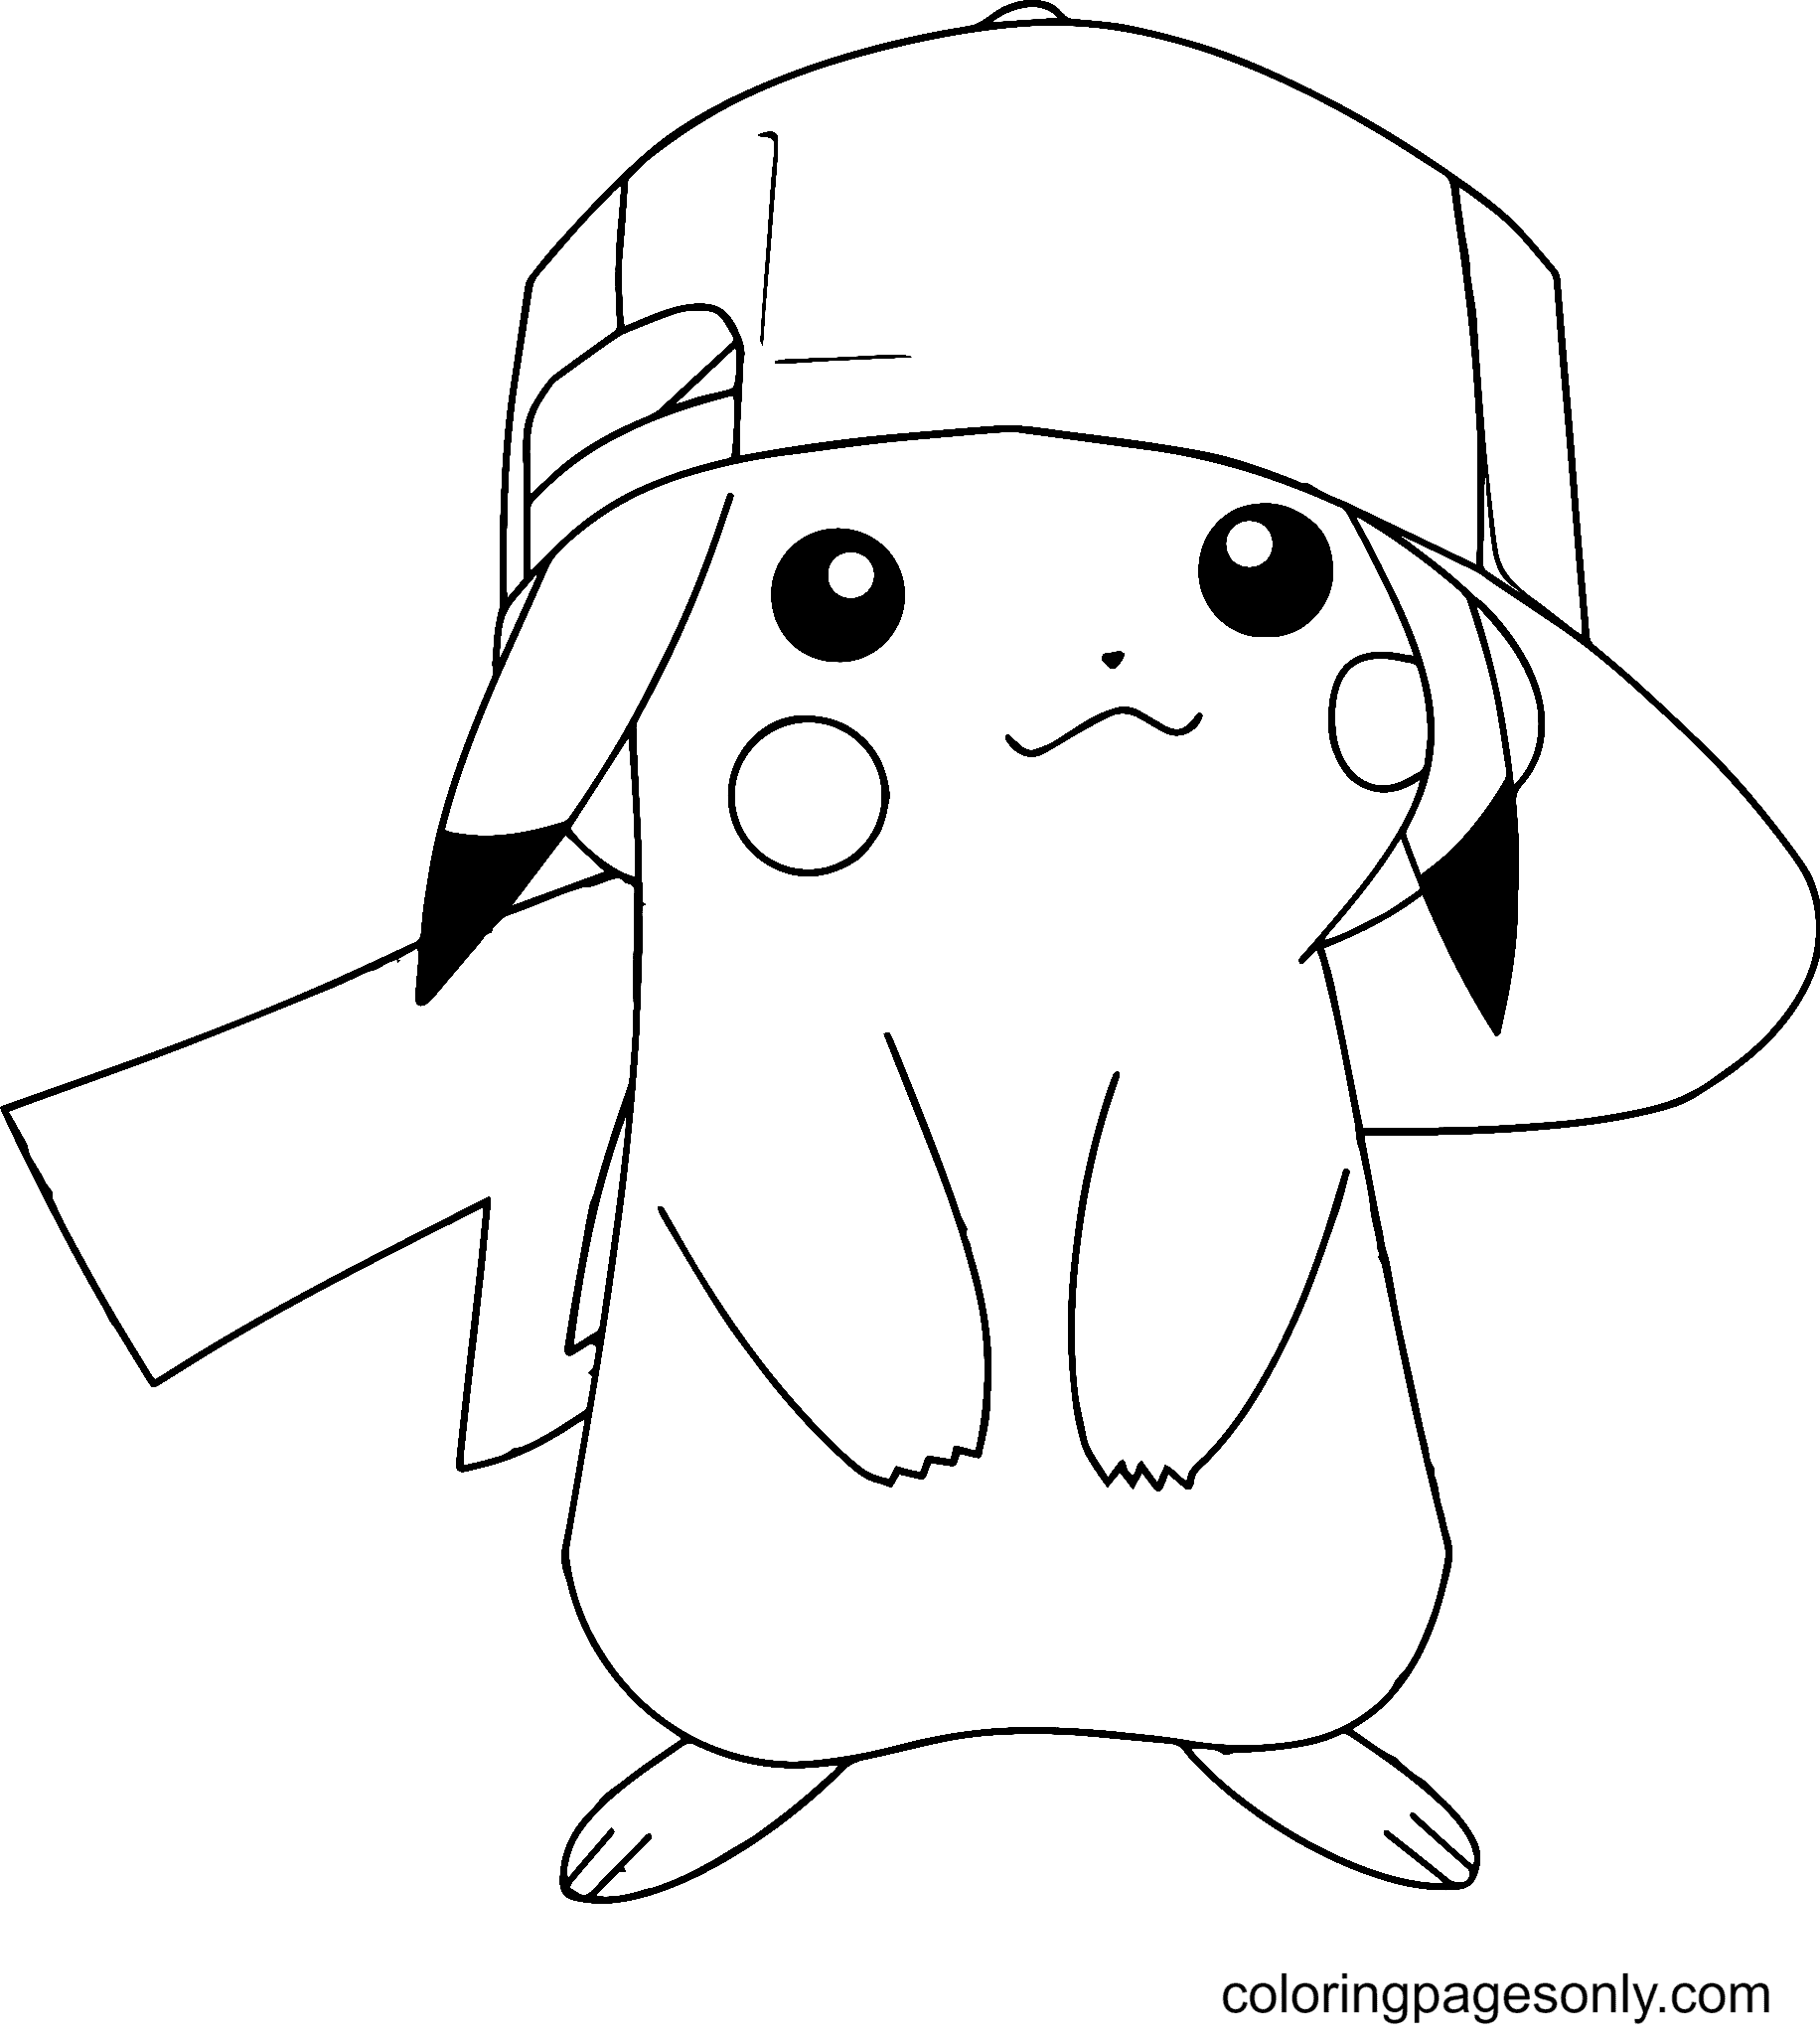 Pikachu Wearing A Hat Coloring Page